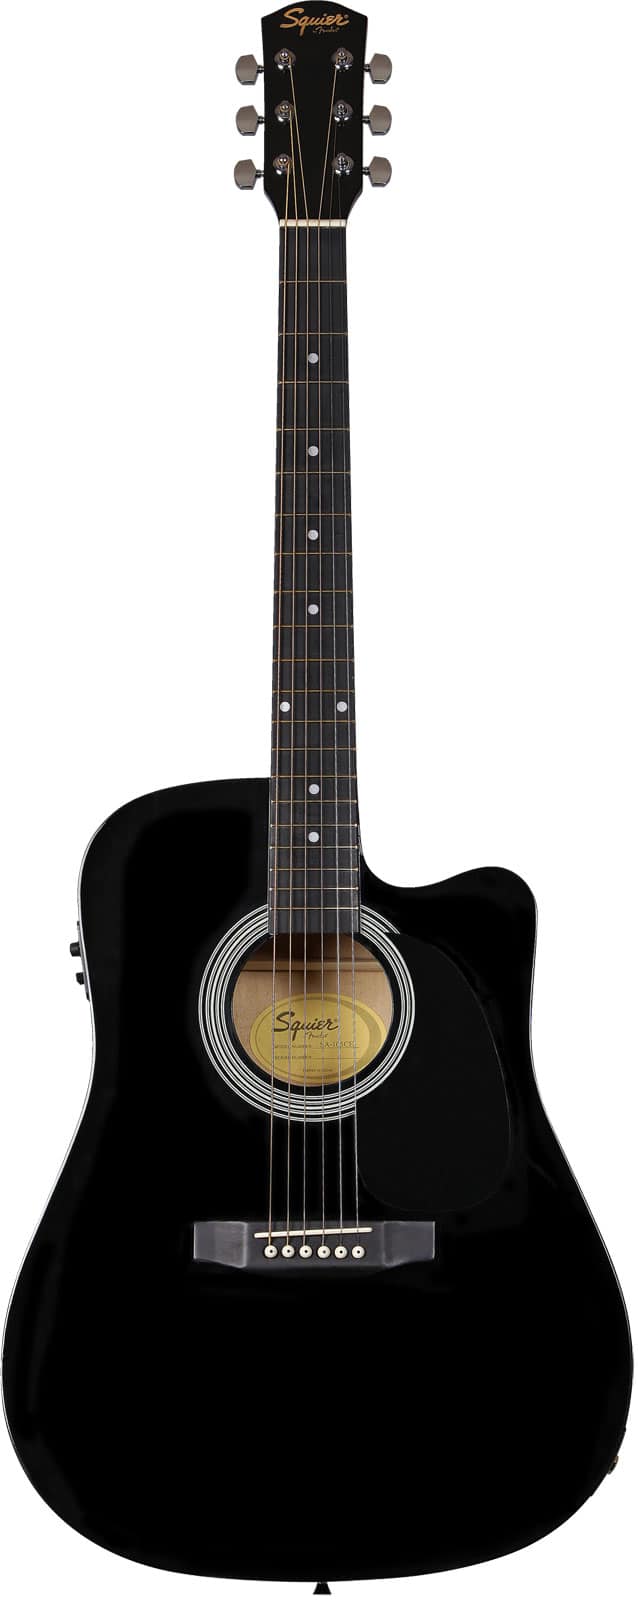 SQUIER SA-105CE, DREADNOUGHT CUTAWAY, STAINED HARDWOOD FINGERBOARD, BLACK